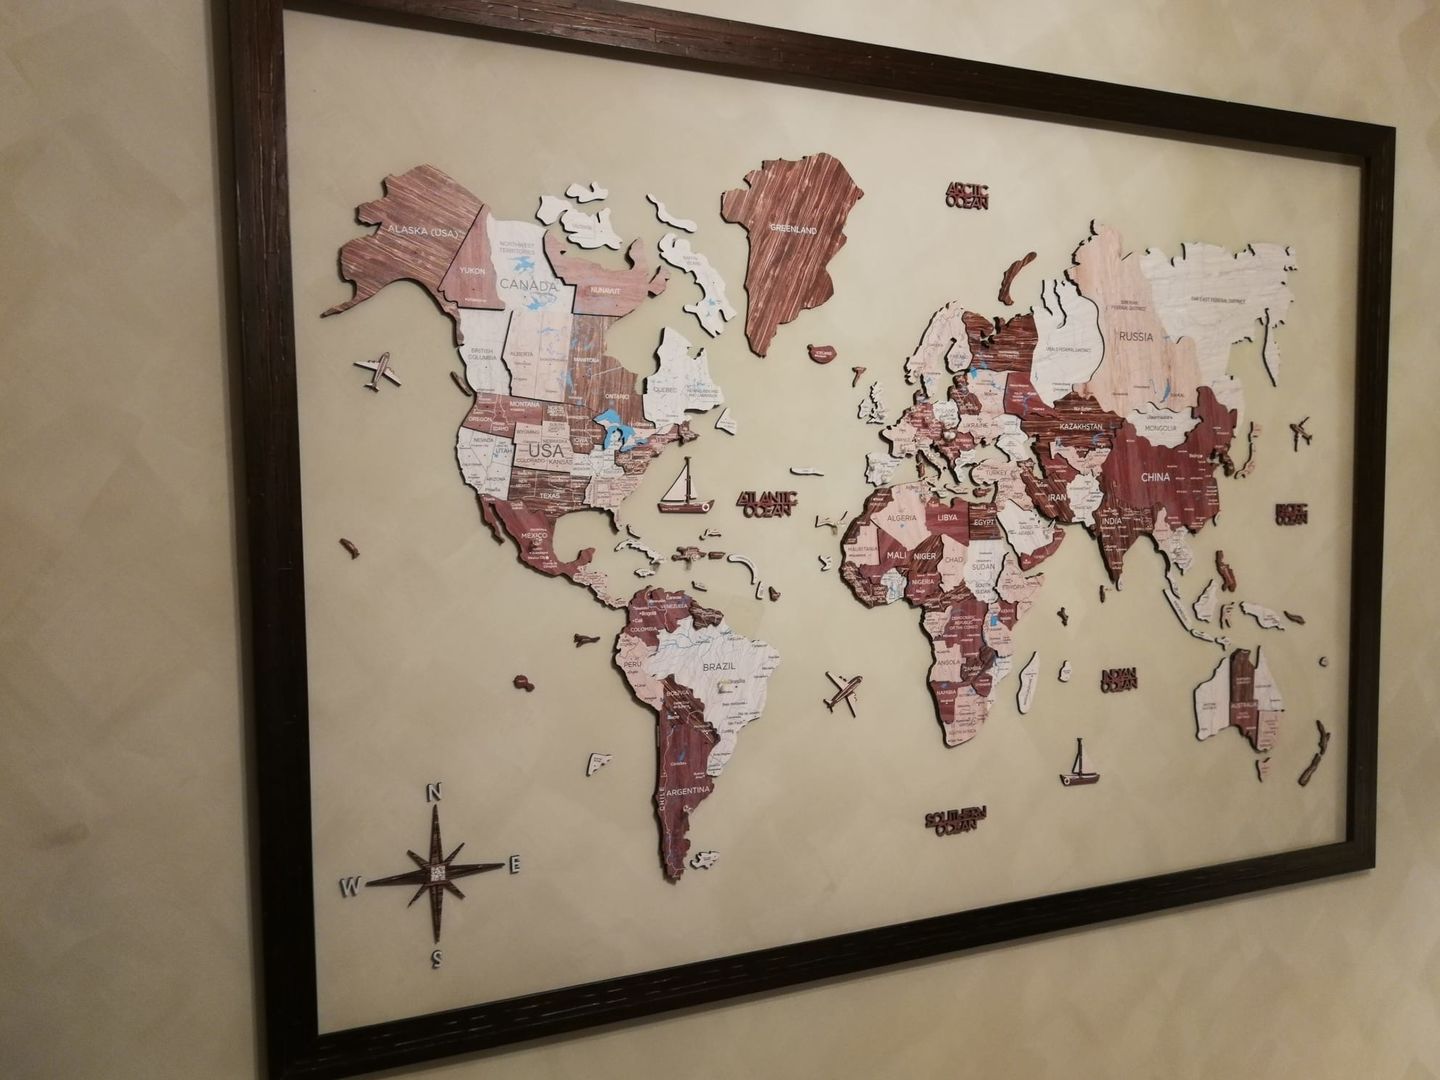 Wooden World Map Puzzle